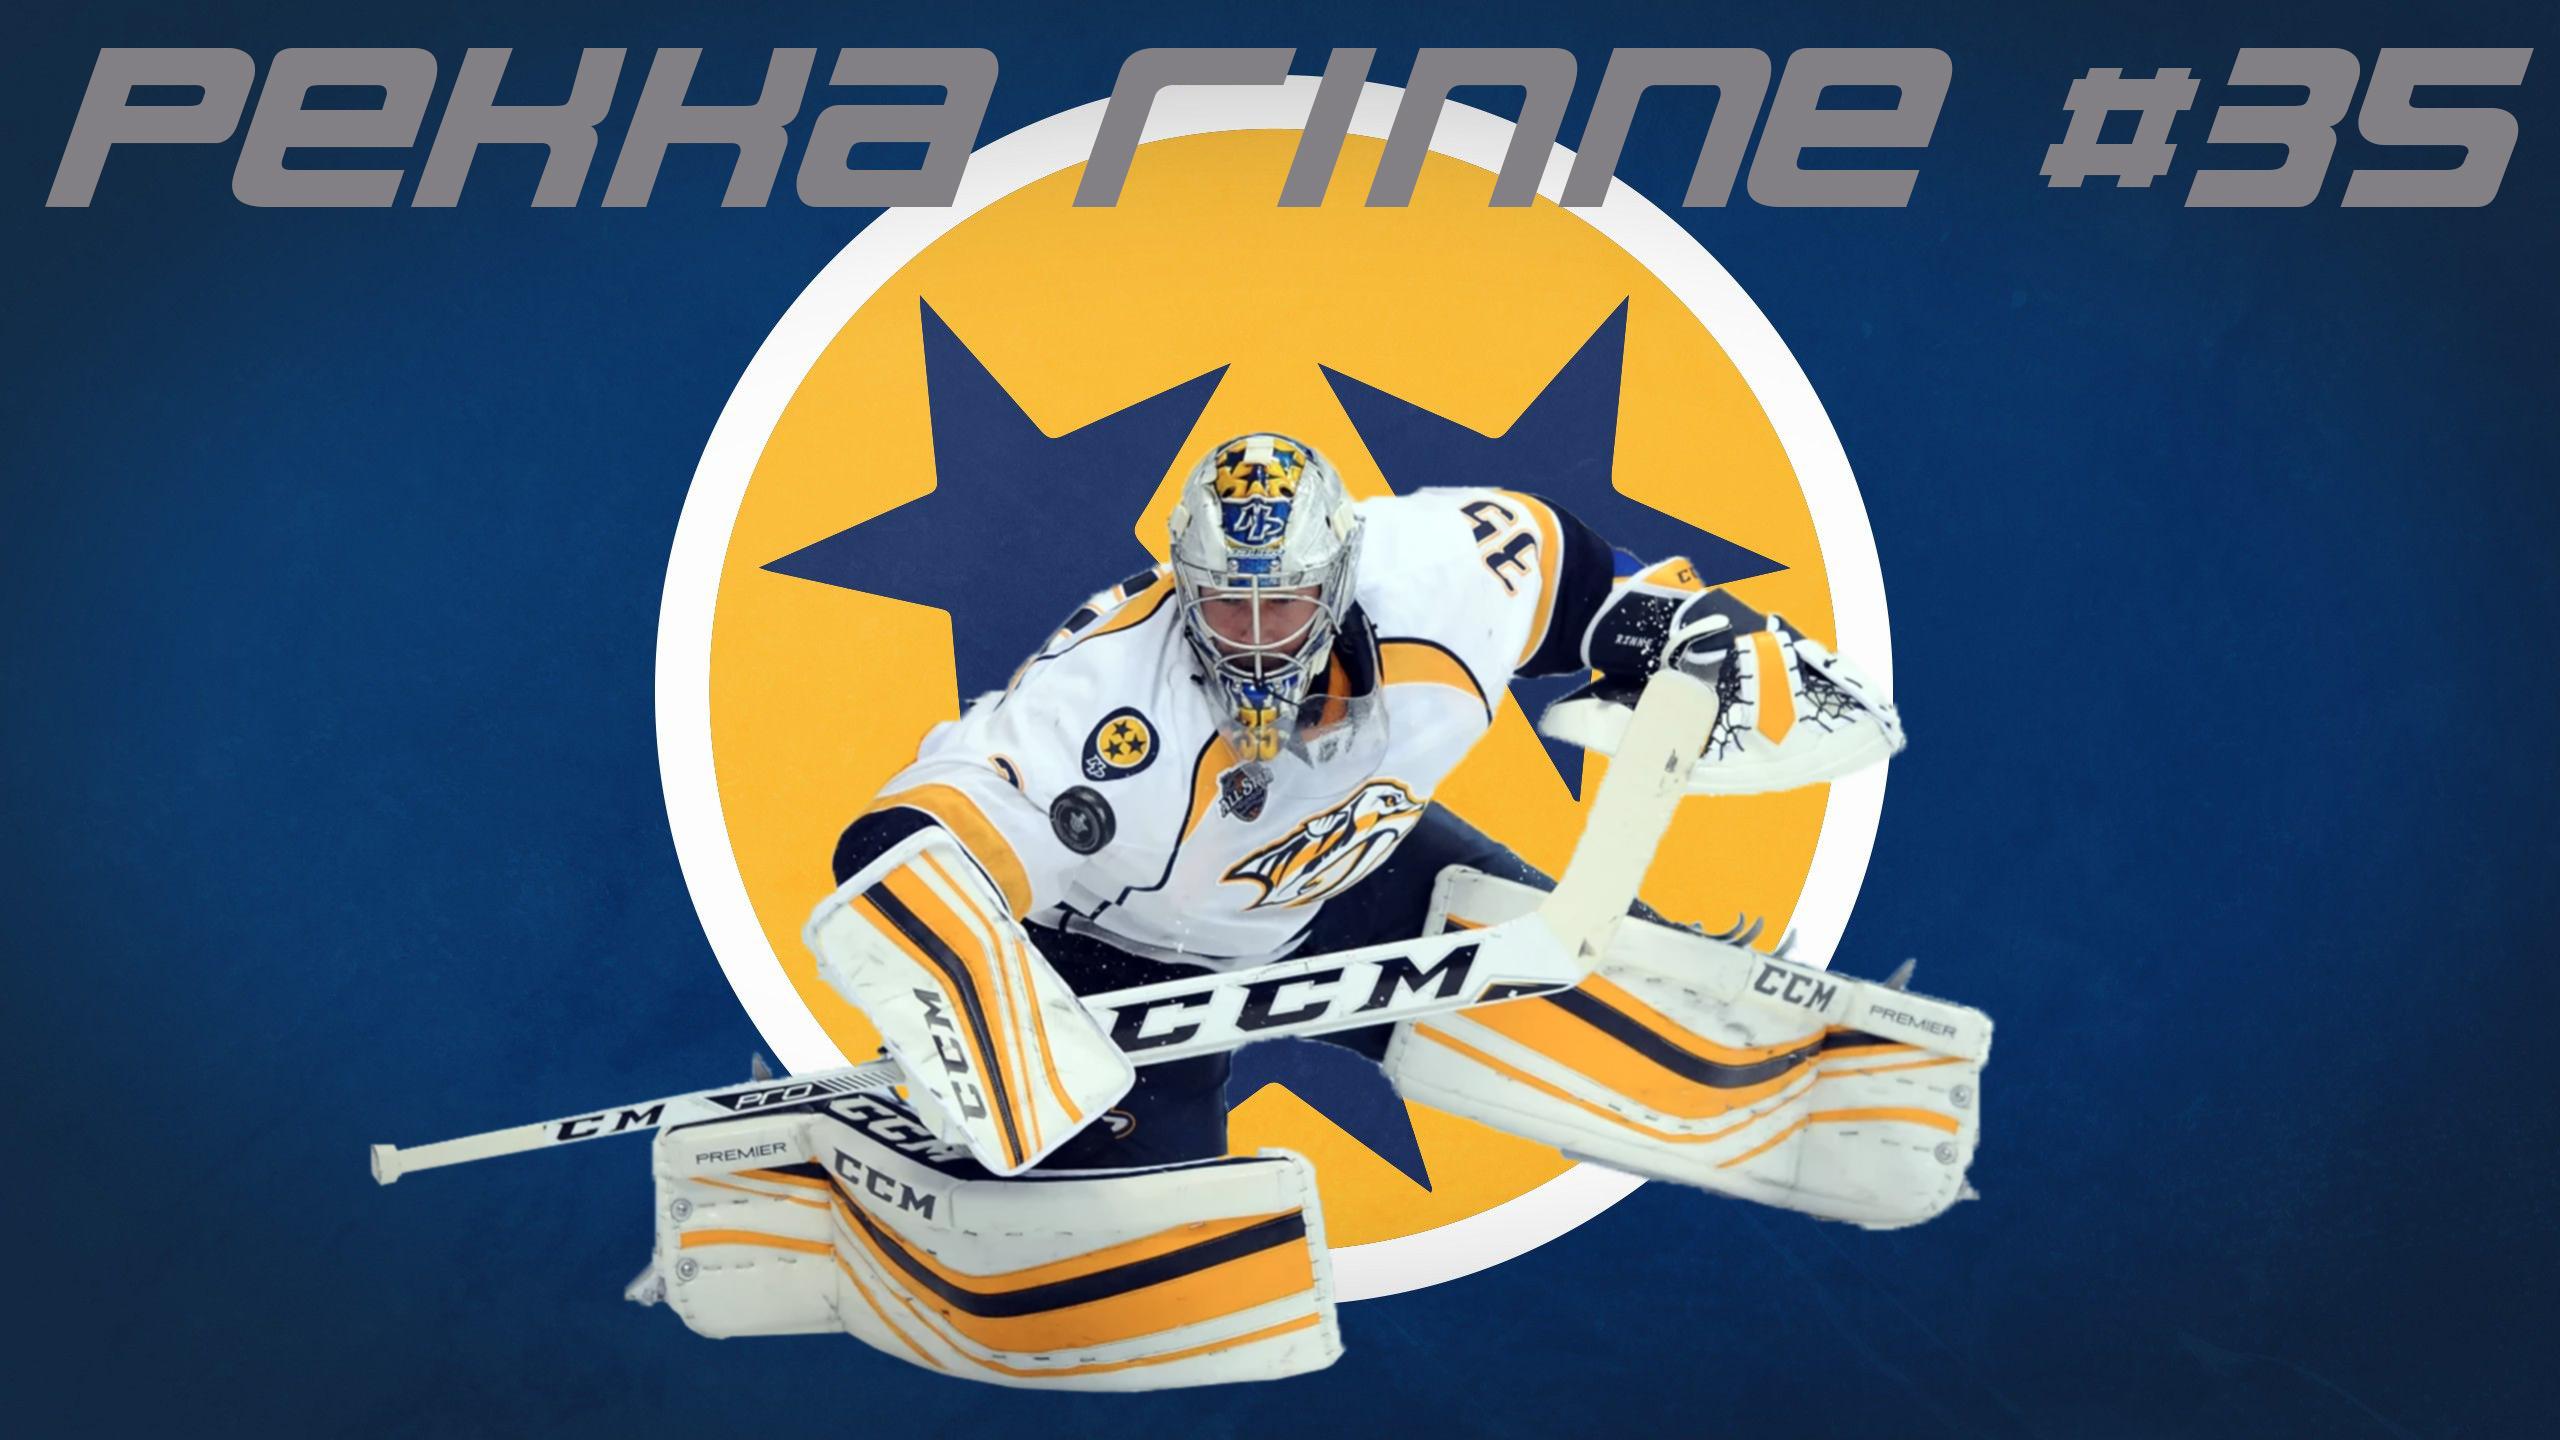 Pekka Rinne Wallpaper New To PS, Would Like: Critiques Tips